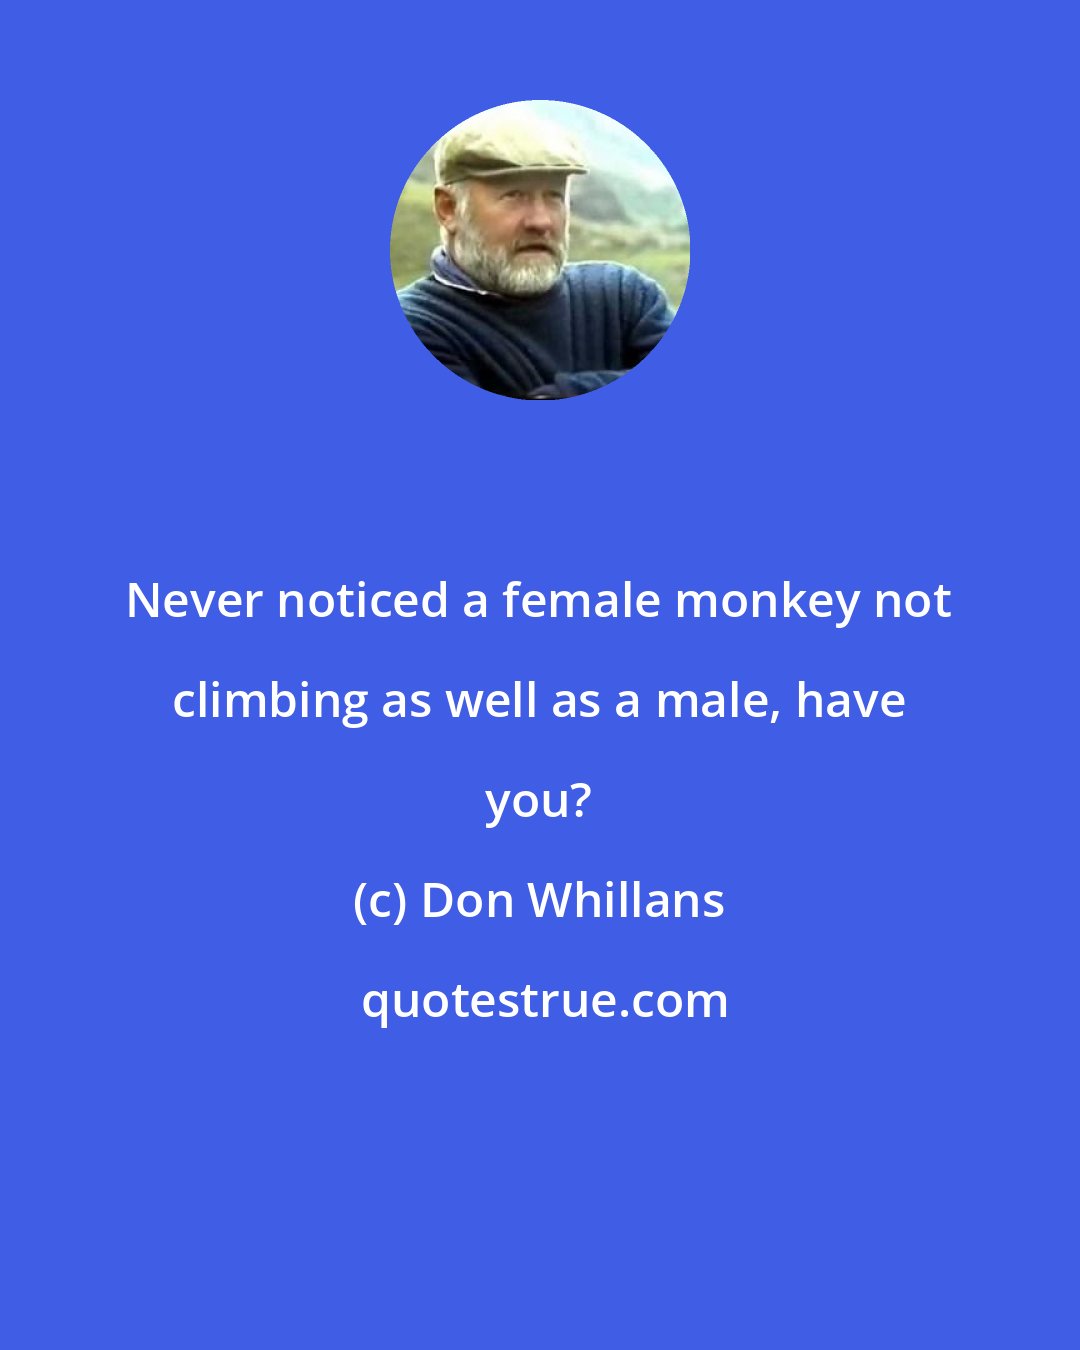 Don Whillans: Never noticed a female monkey not climbing as well as a male, have you?